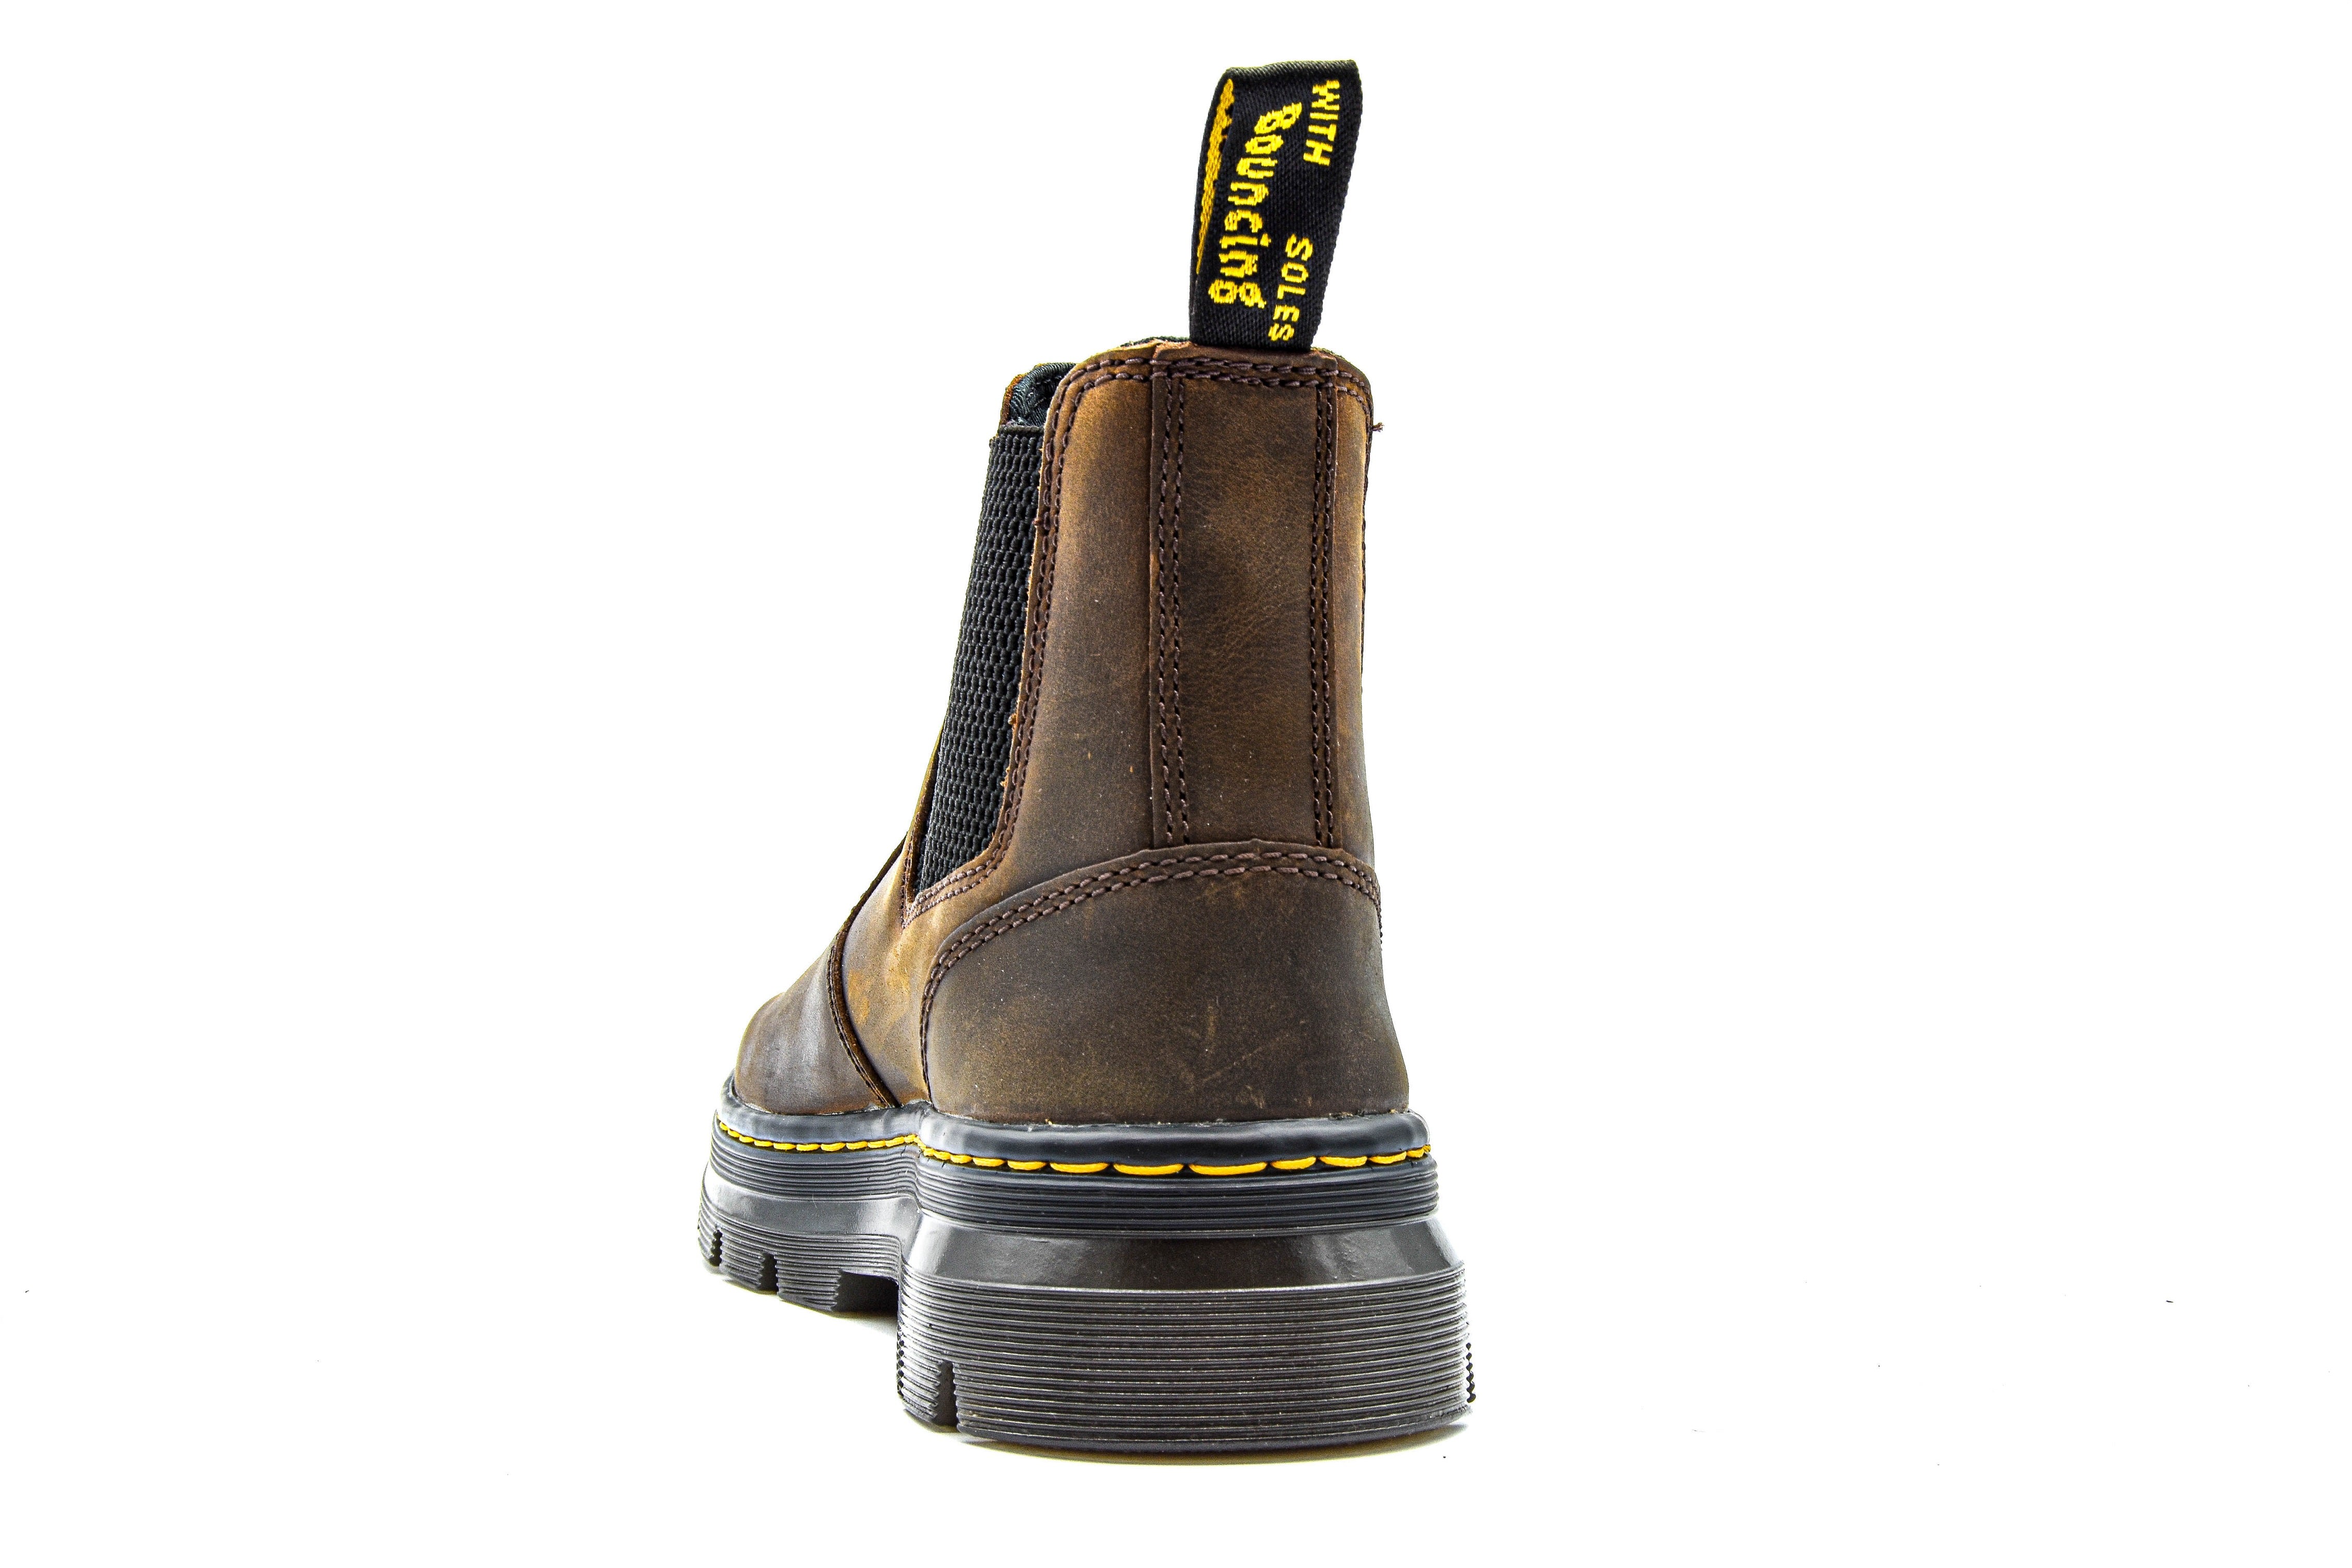 DR. MARTENS EMBURY CRAZY HORSE LEATHER CASUAL BOOTS